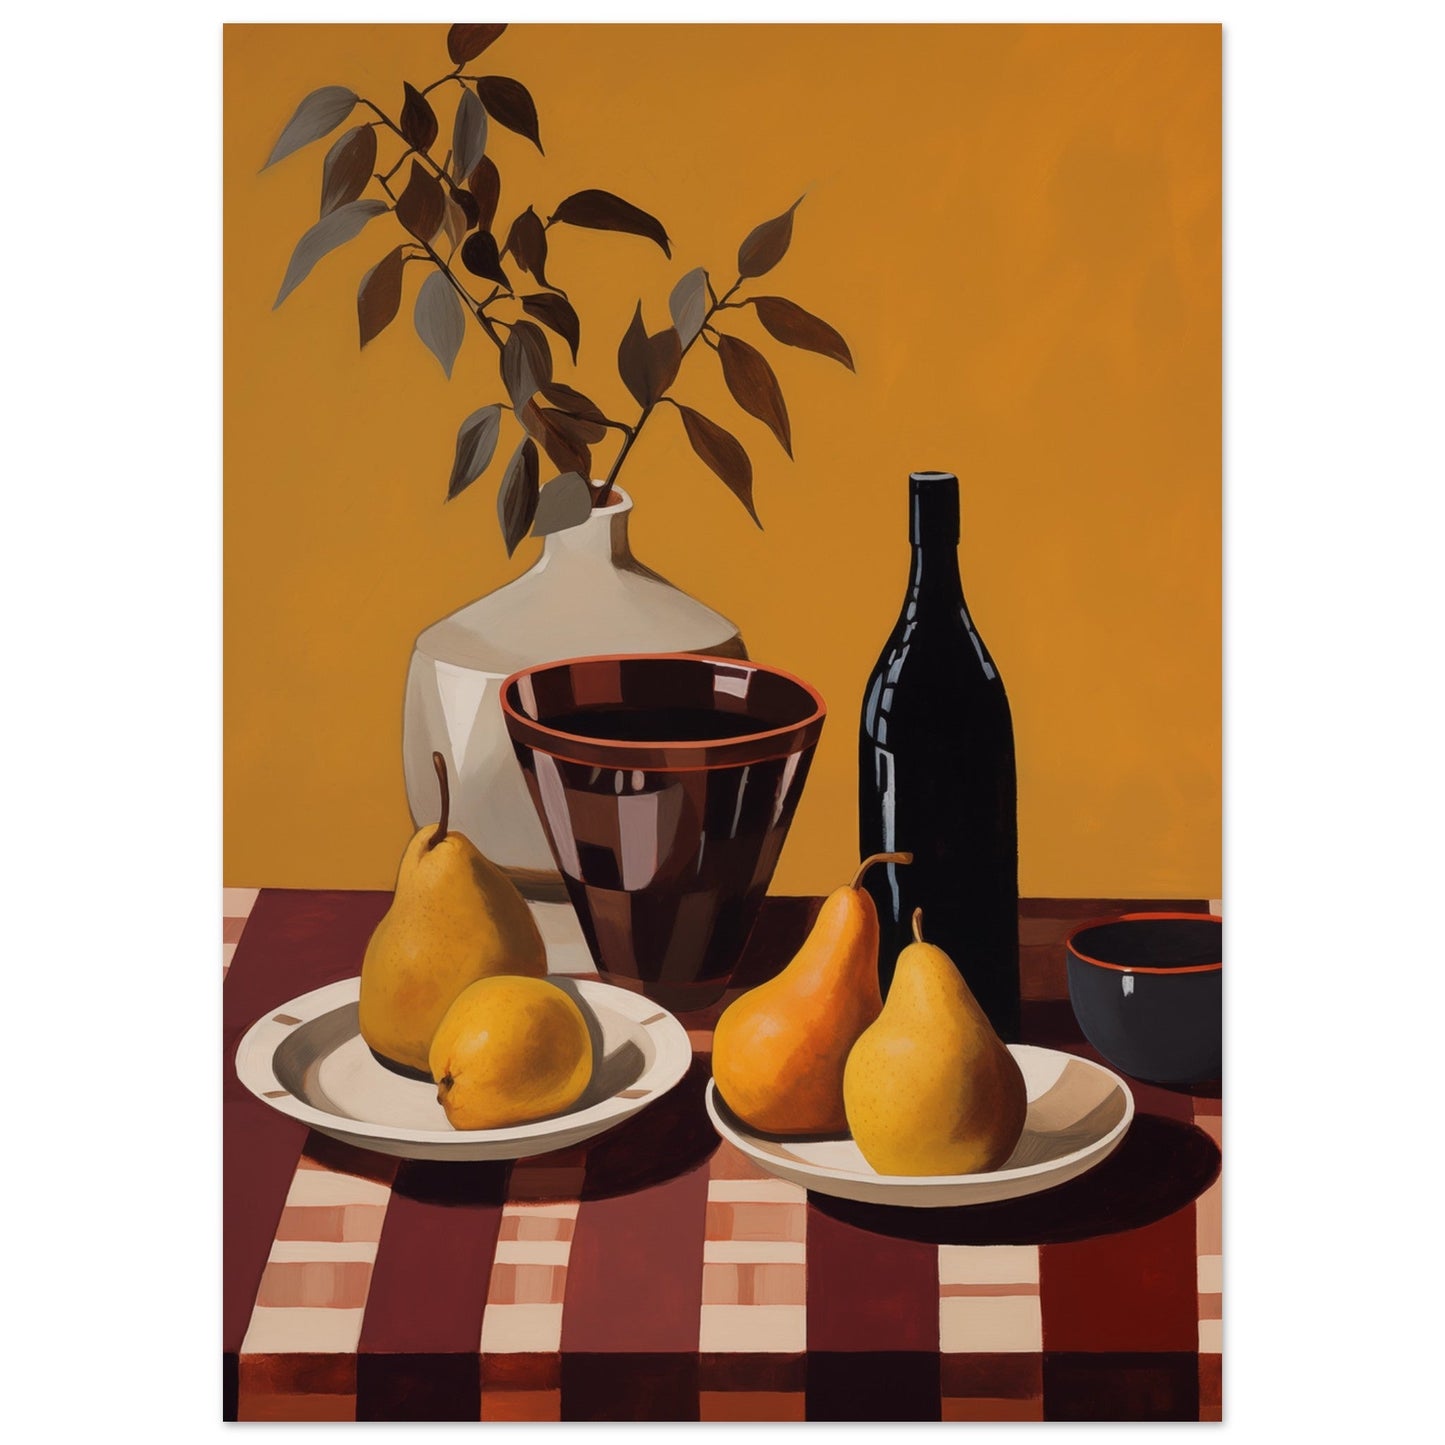 A Poster of Autumnal Still Life with pears and a bottle of wine.